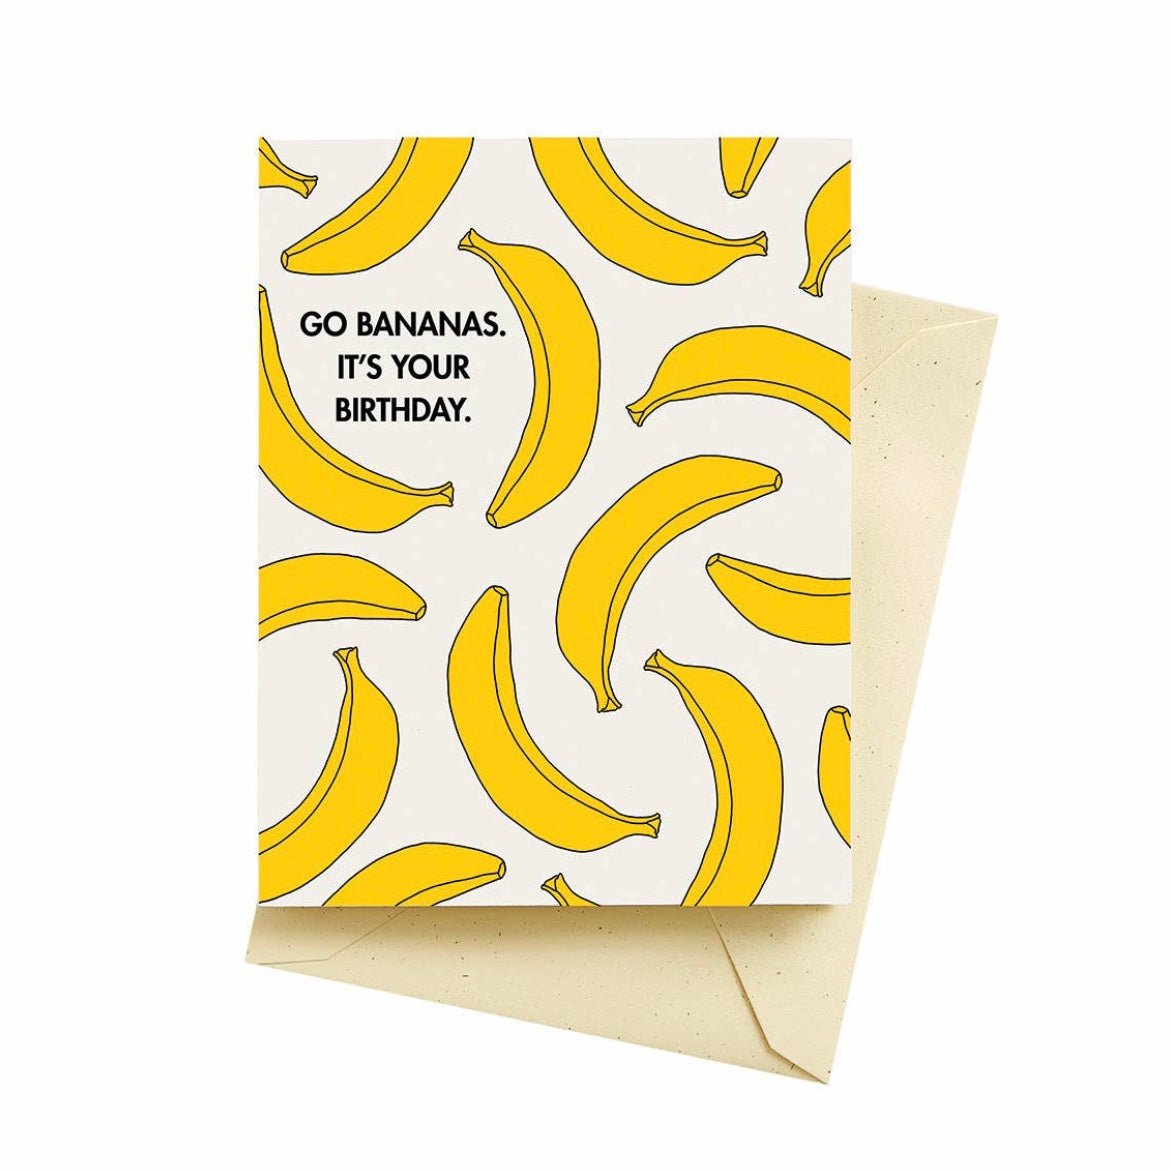 Go Bananas it's your birthday greeting card